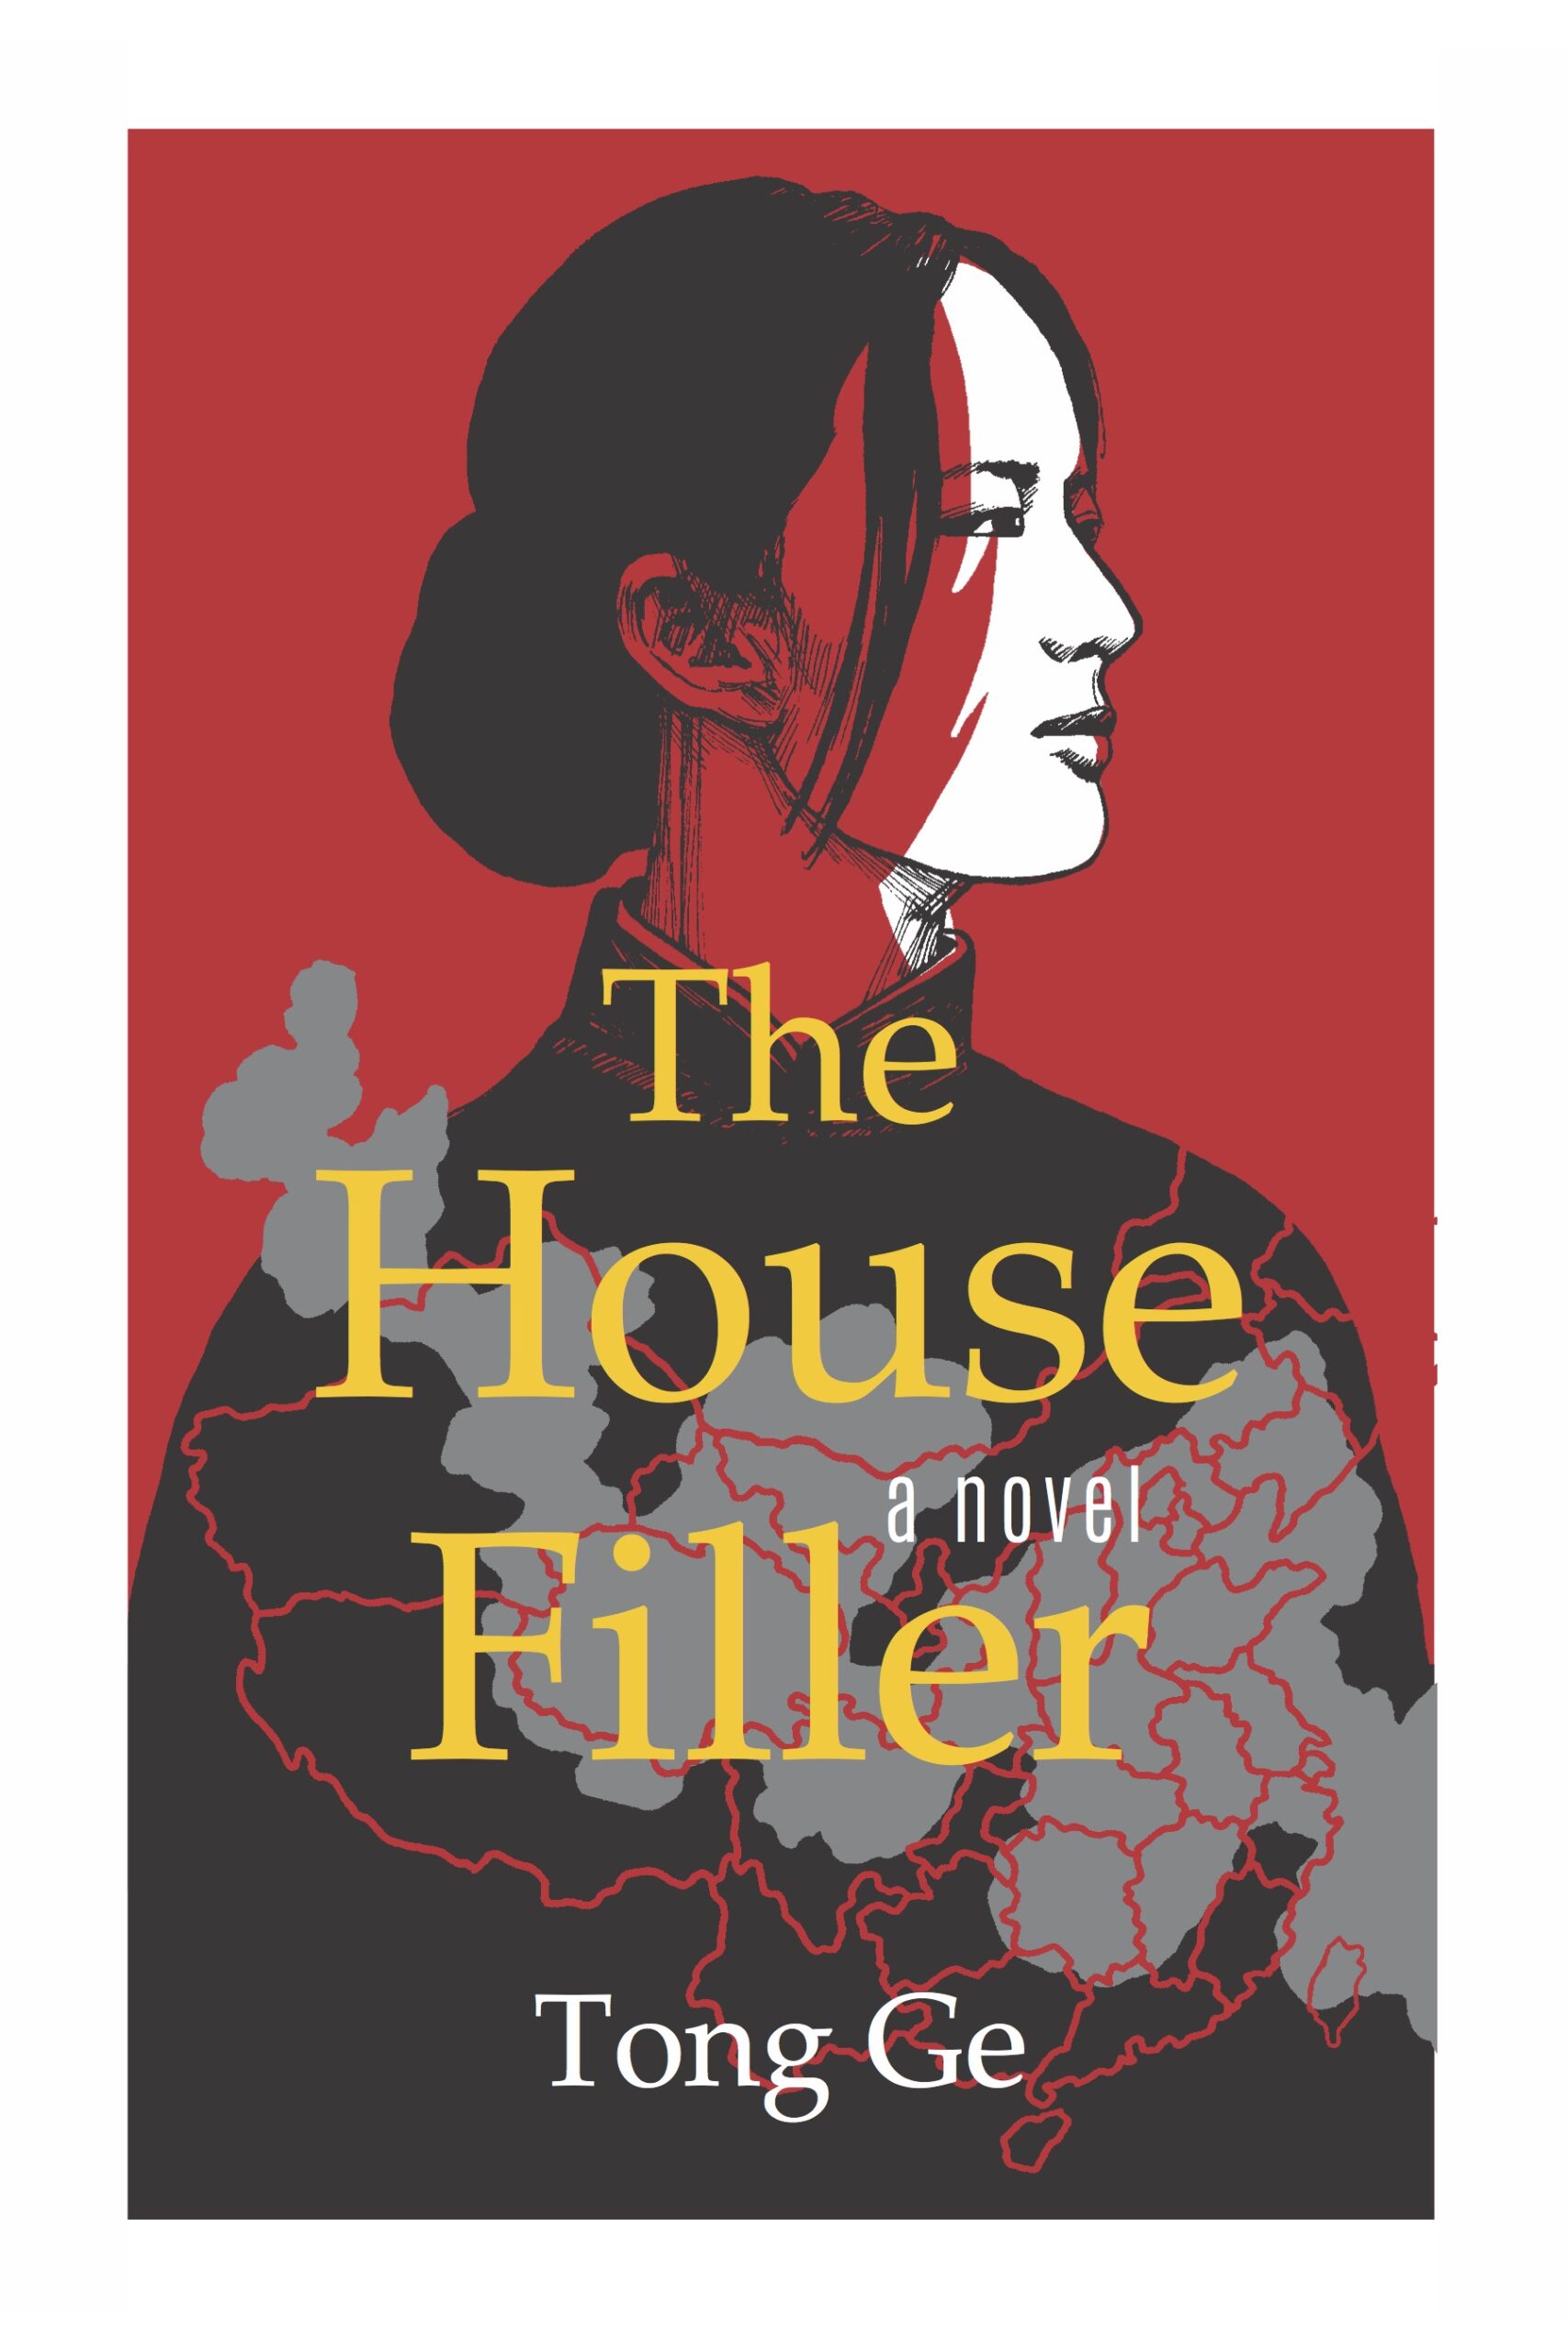 “The House Filler cover